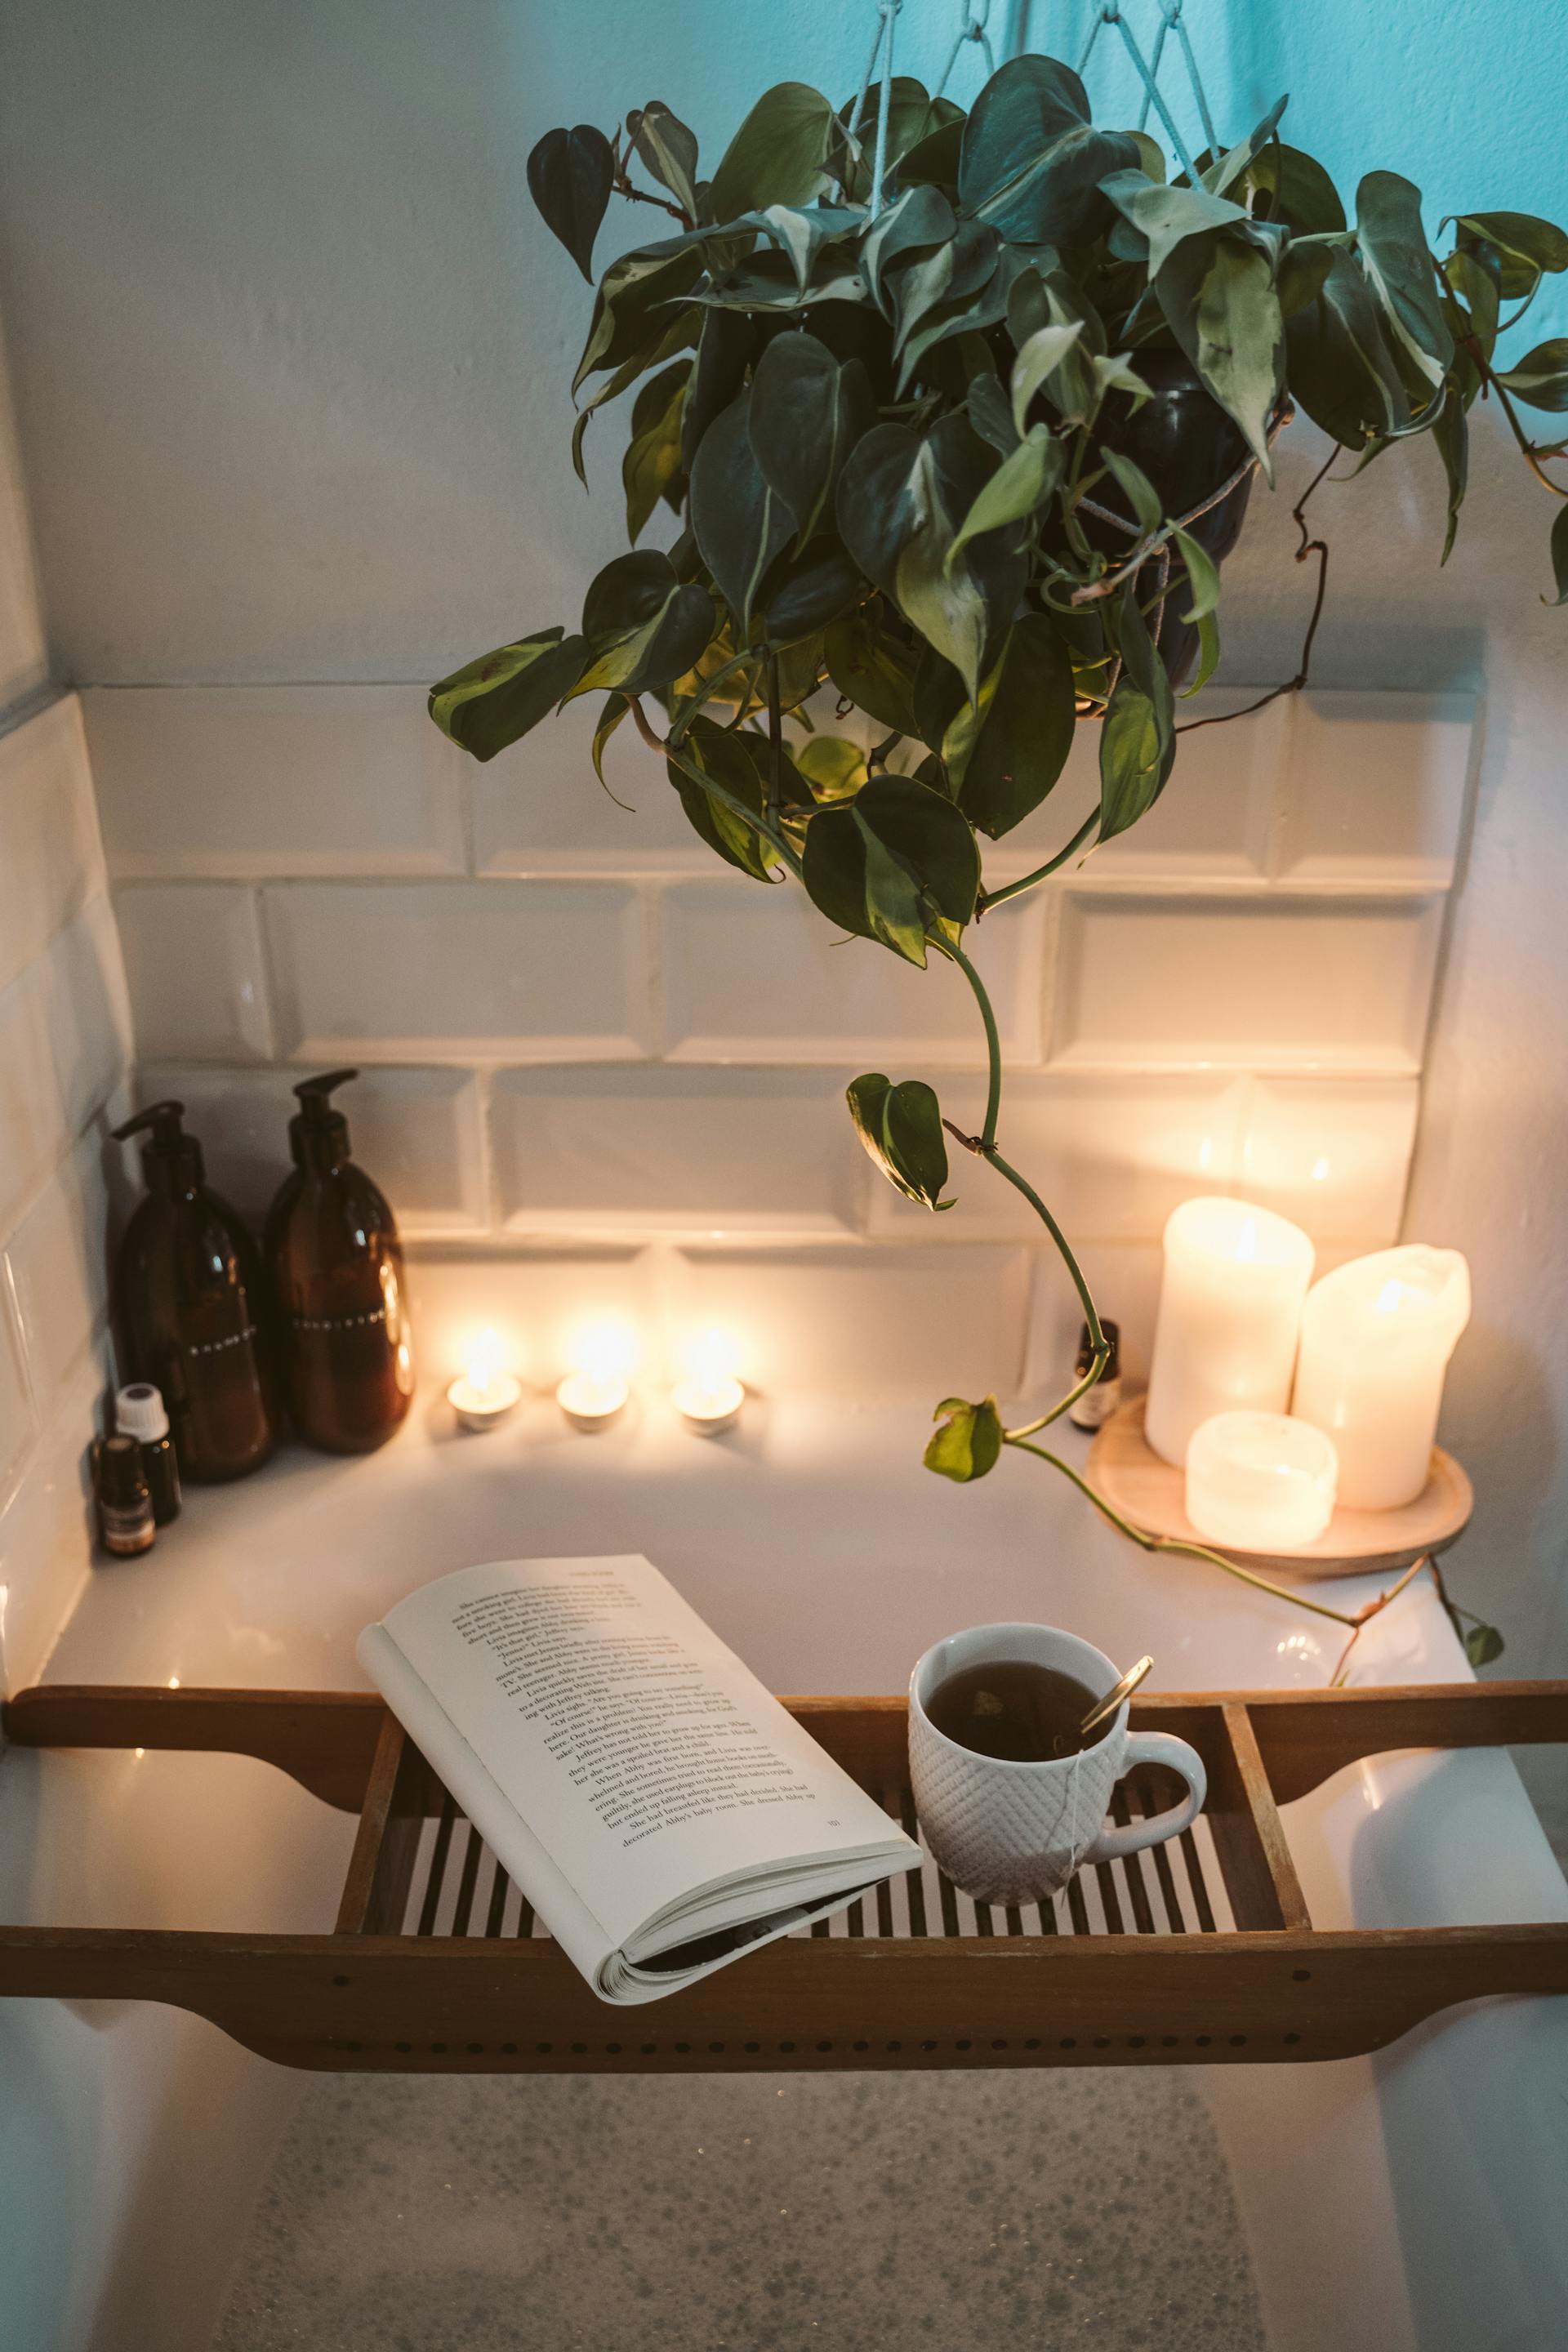 A bubble bath with tea and a book | Source: Pexels